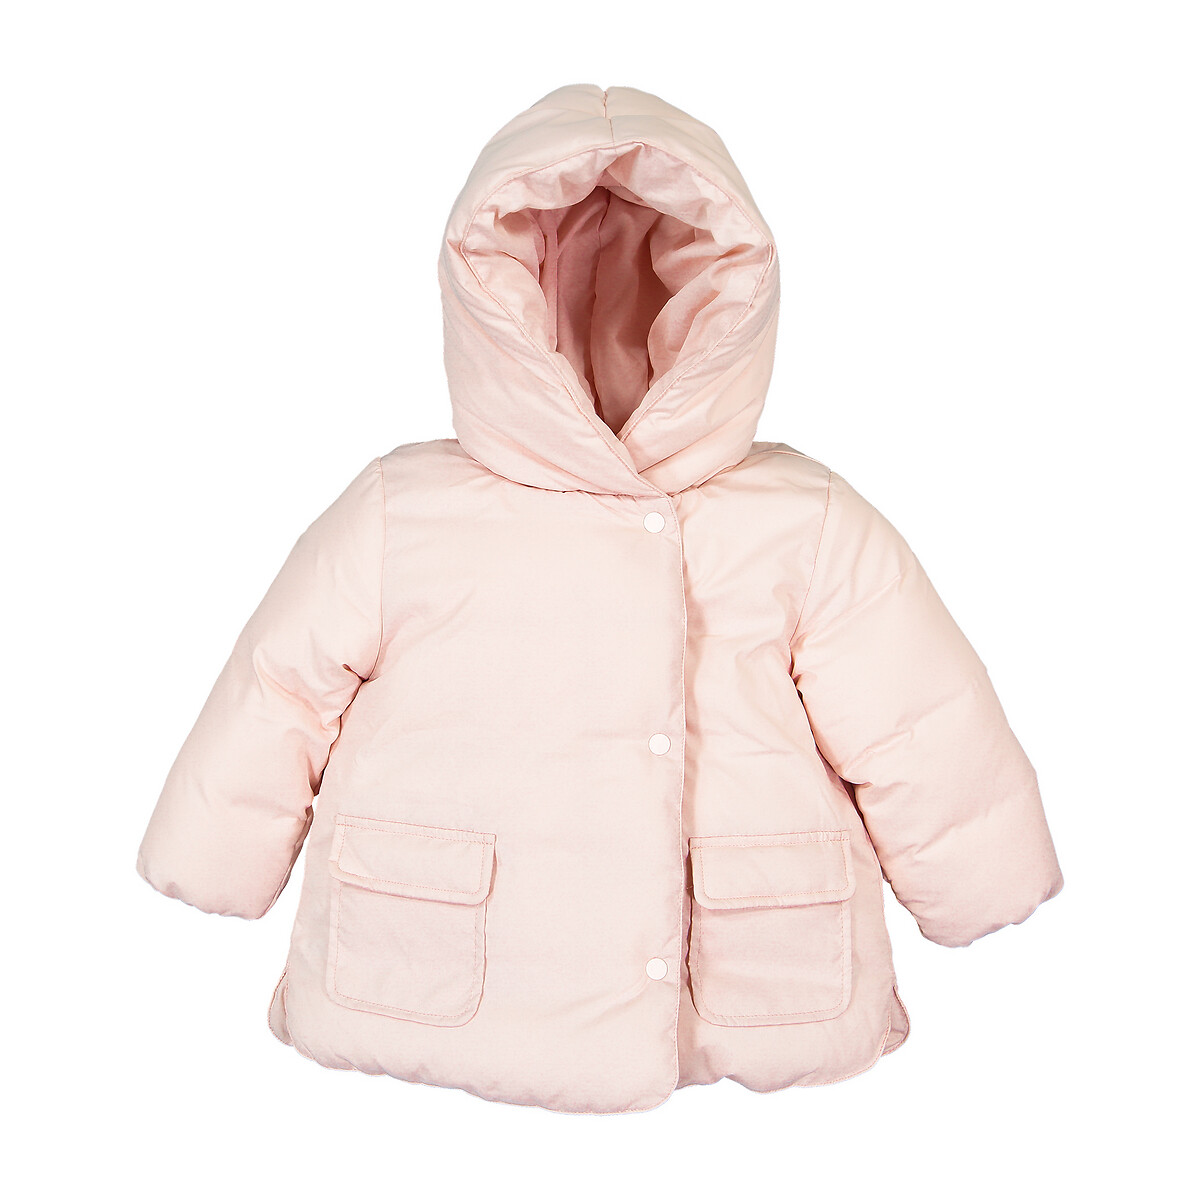 LA REDOUTE Baby Girl Pink Quilted Hooded Snowsuit 0-3 3-6 6-9 9-12 m RRP £40 